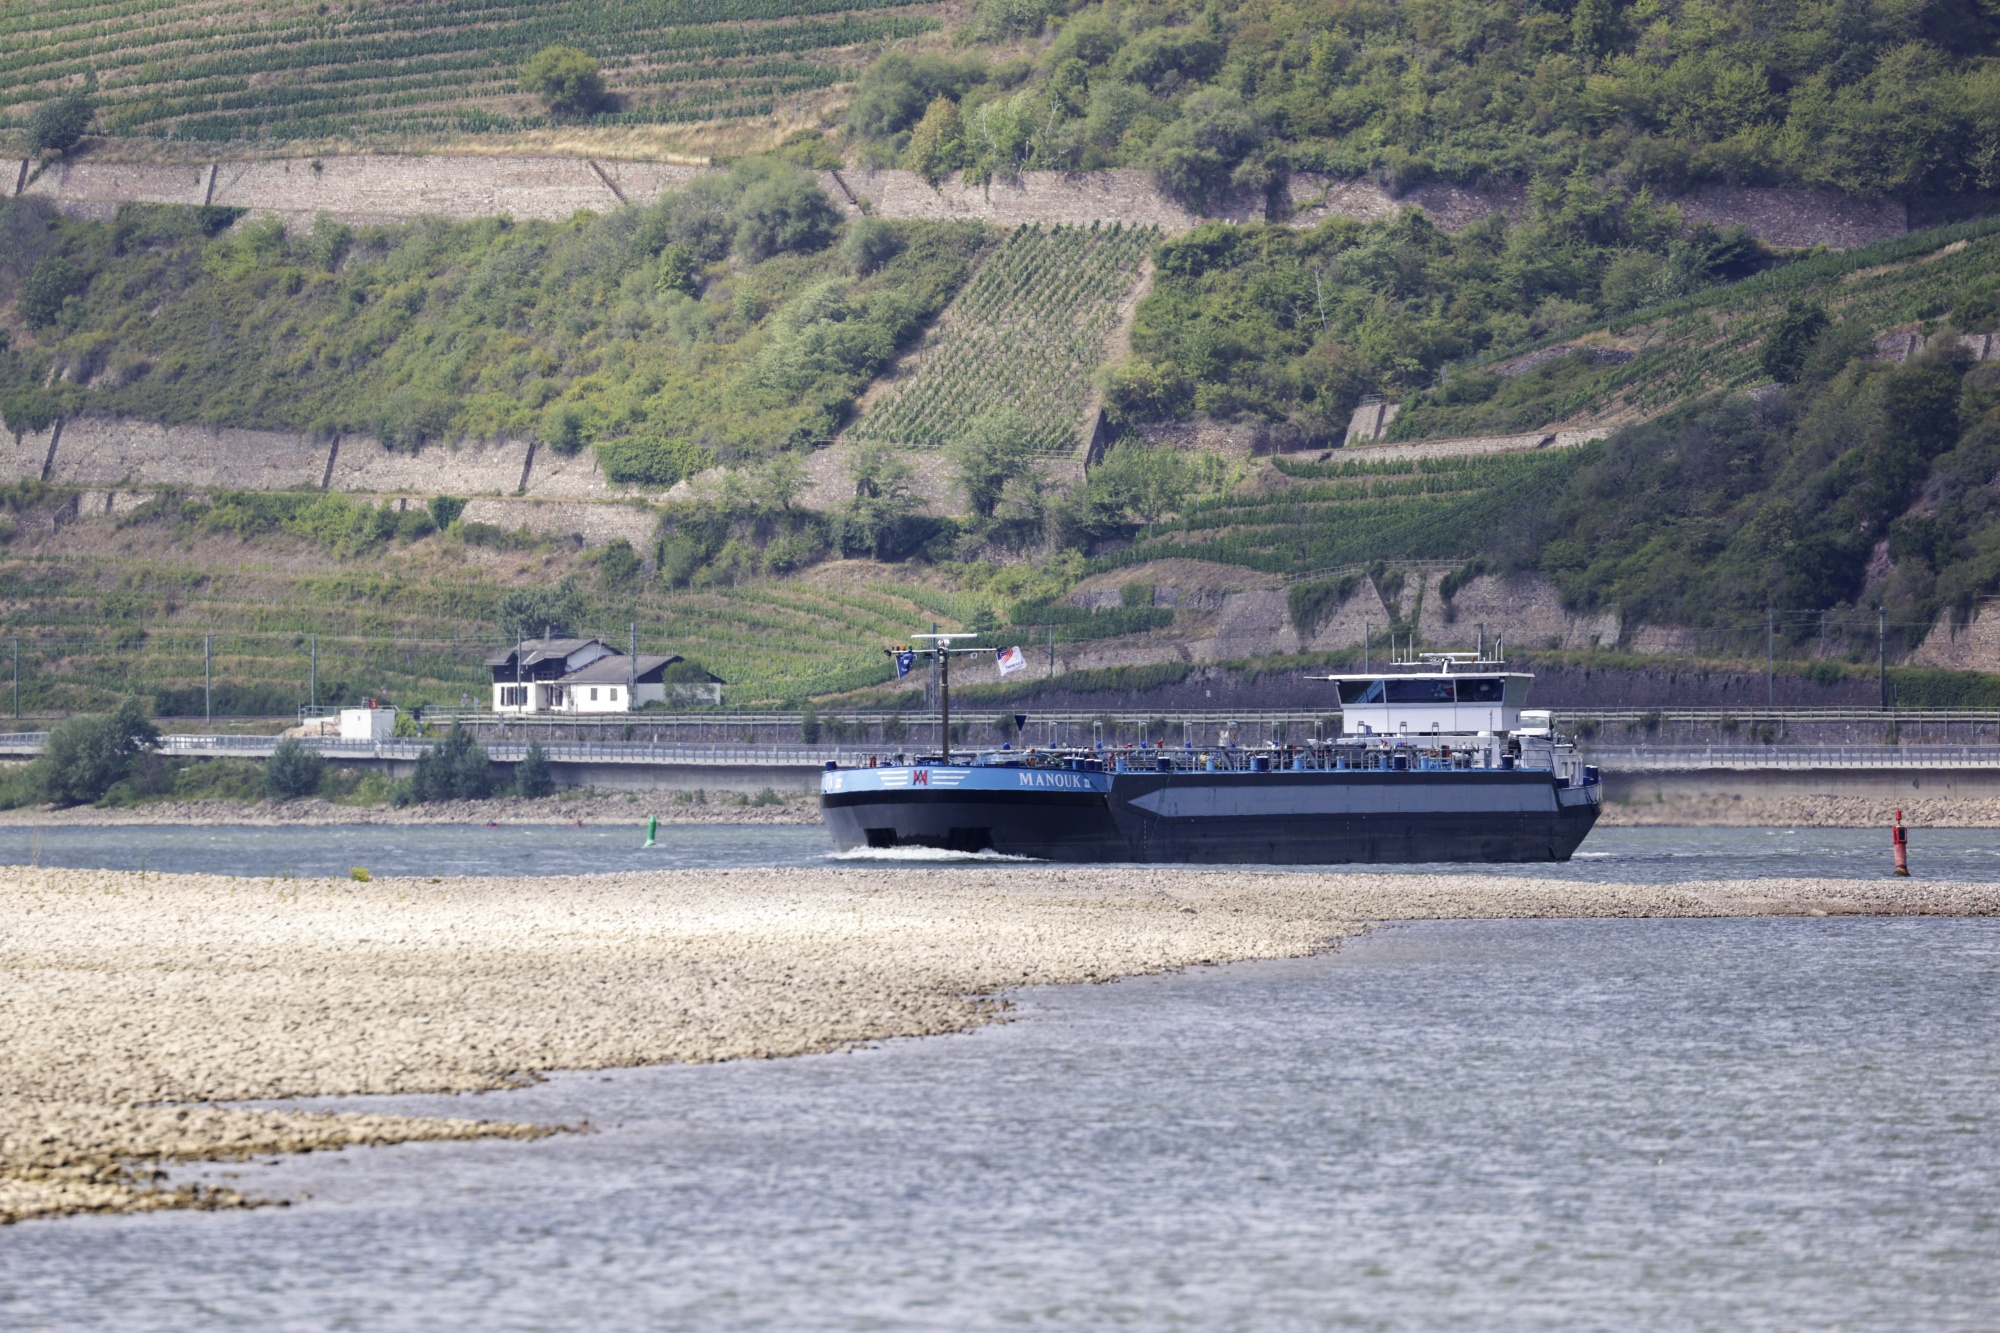 An oil and chemical tanker&nbsp;sails past dry banks on the Rhine River near Assmanshausen, Germany, on July 14.